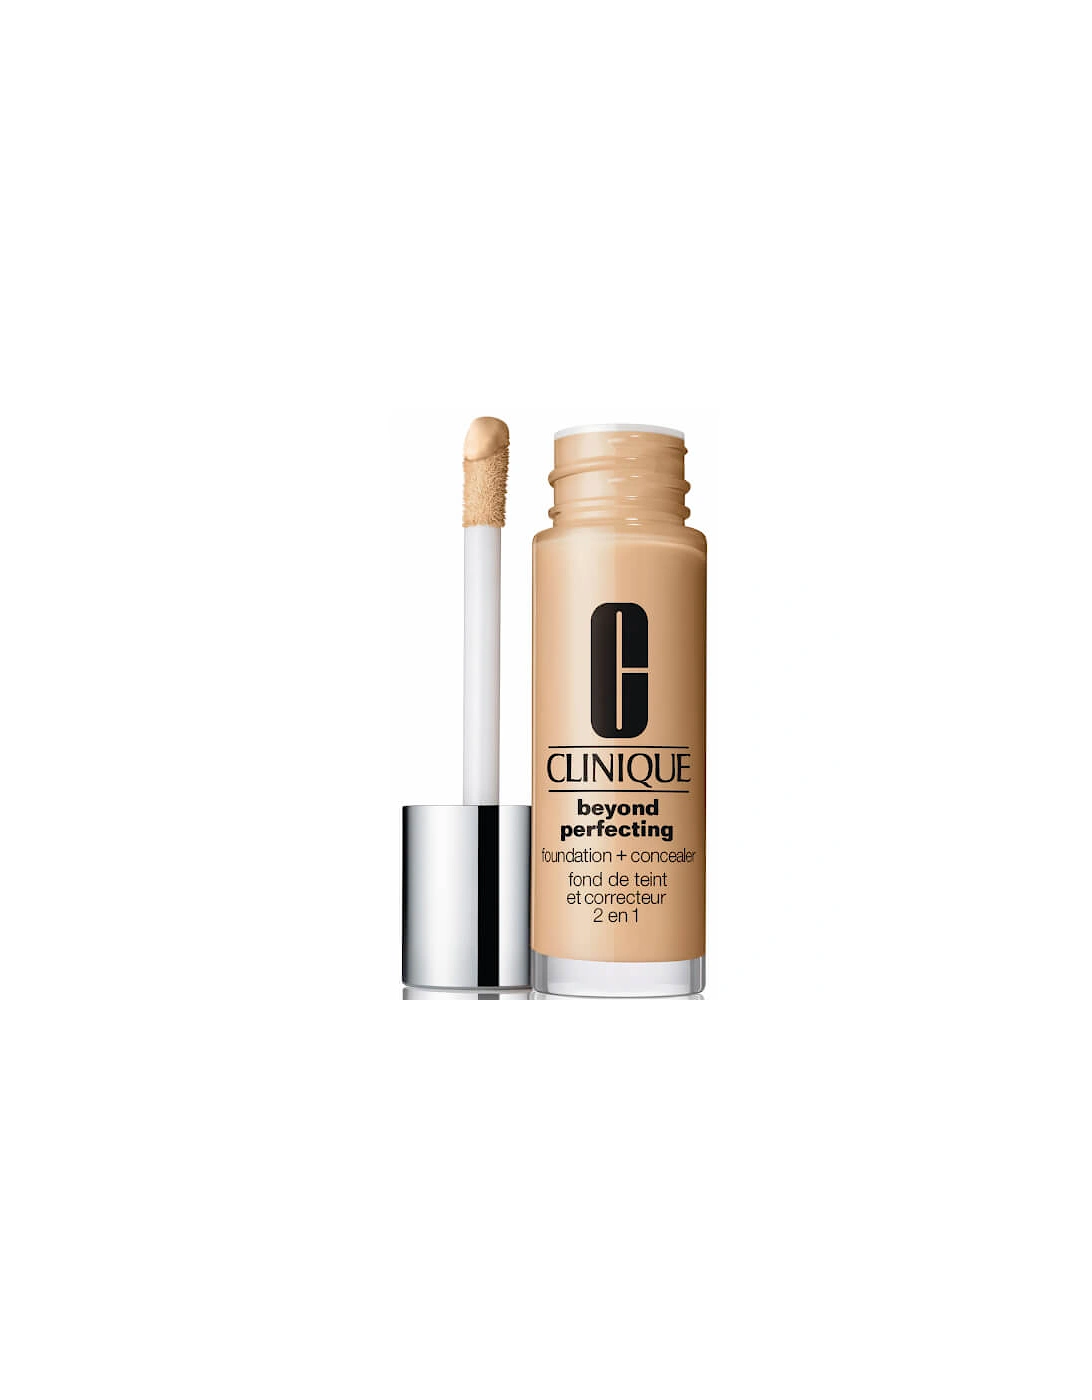 Beyond Perfecting Foundation and Concealer Golden Neutral, 2 of 1